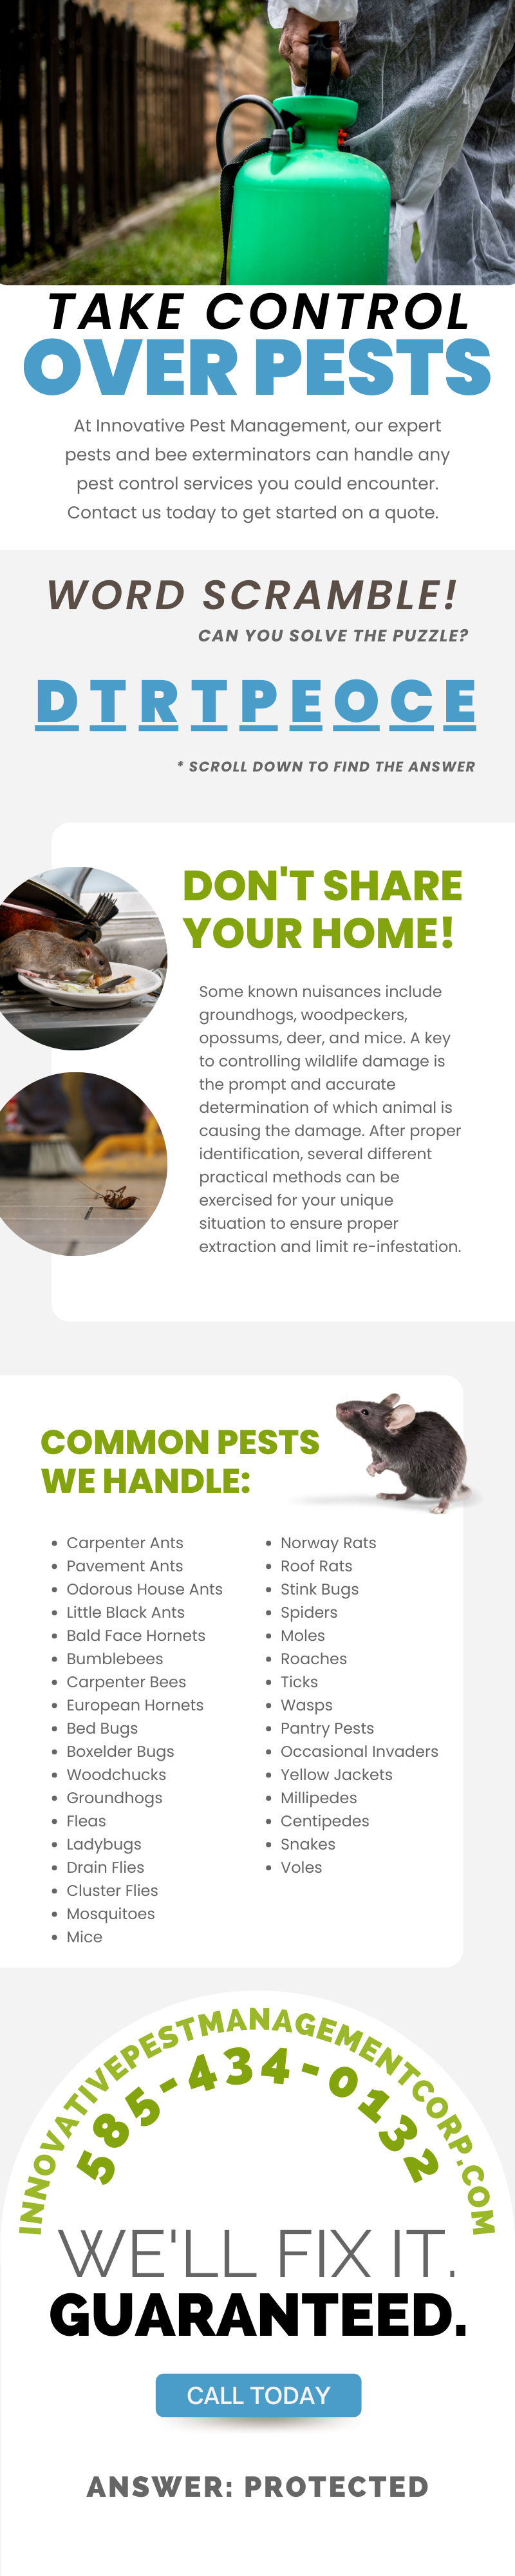 Take Control Over Pests! 3